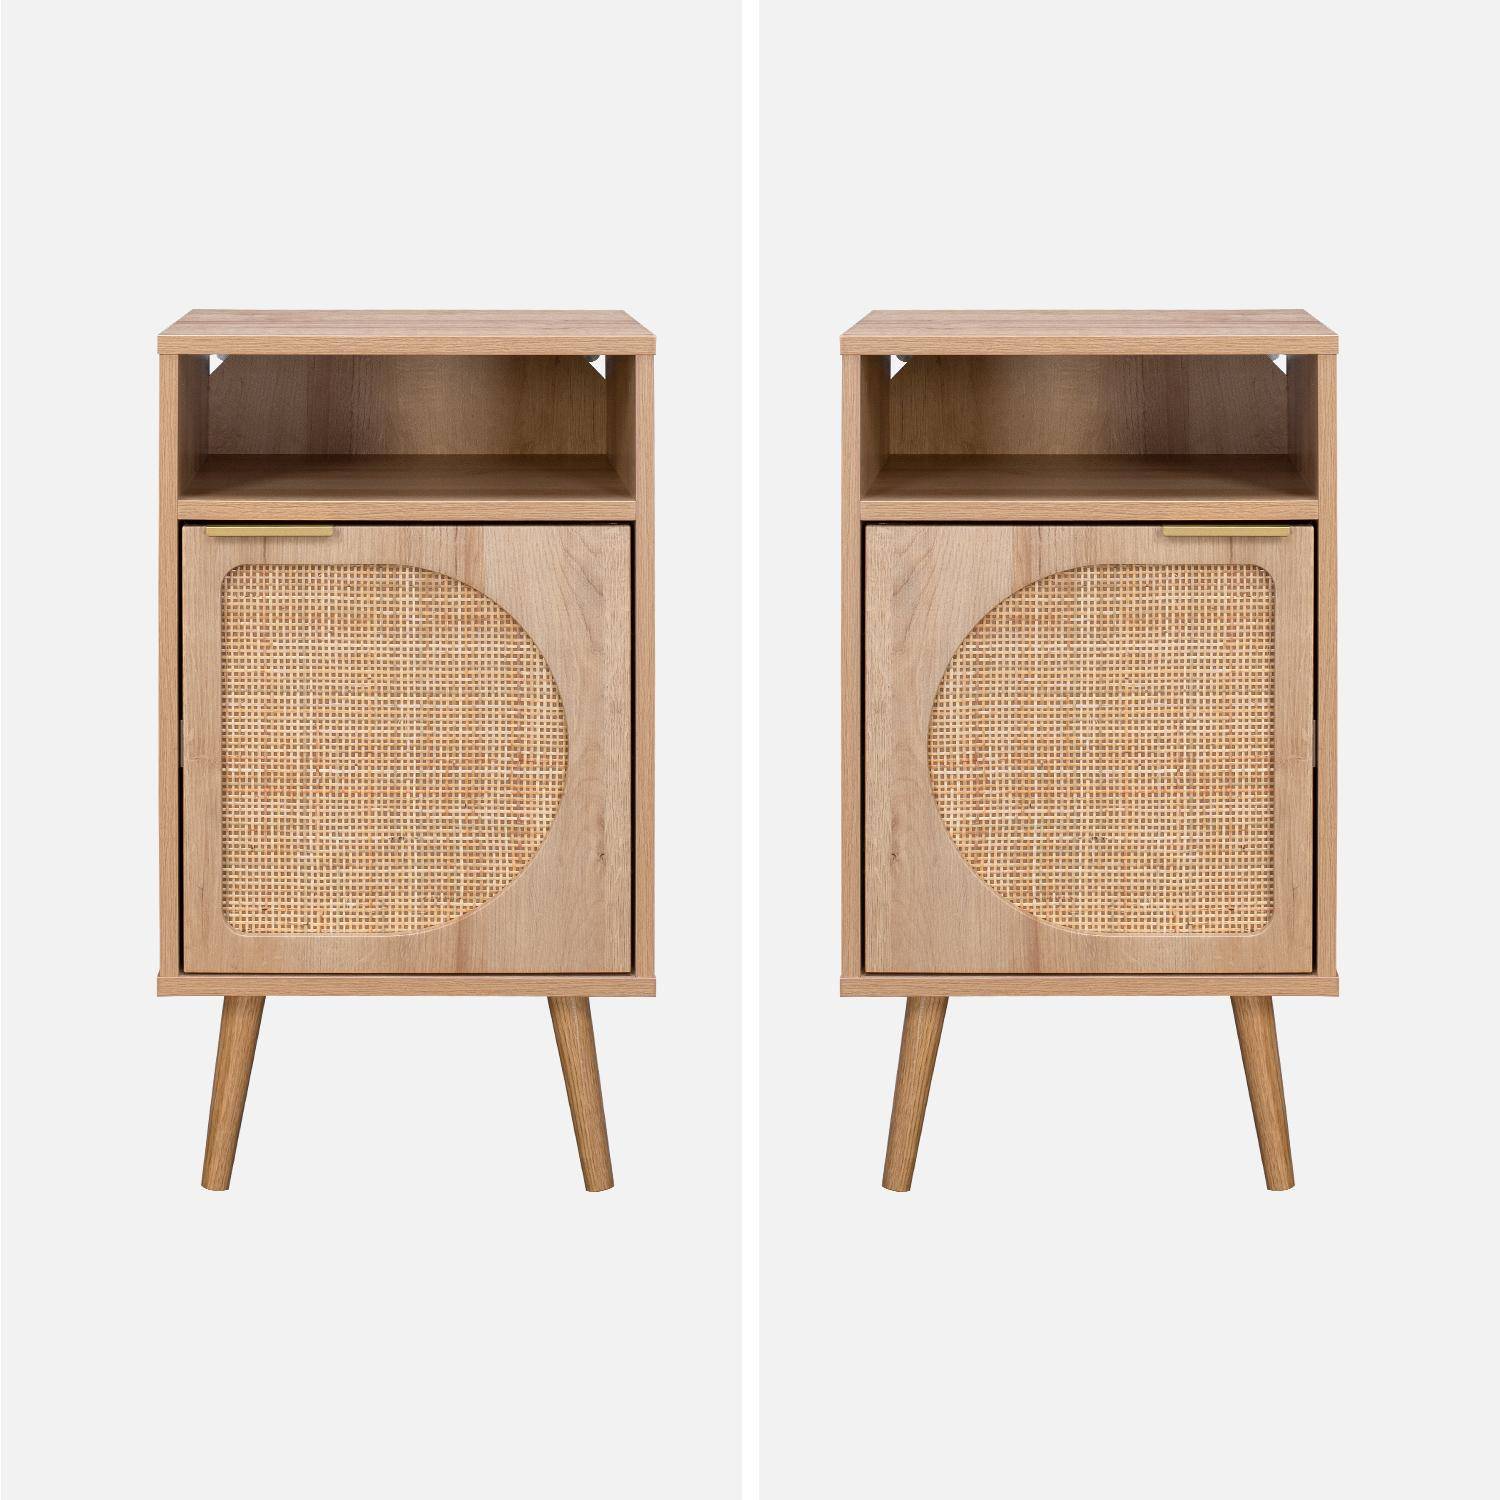 Pair of wood and rounded cane rattan bedside tables, 40x39x65.8cm, Eva, 1 cupboard, 1 storage space each Photo6